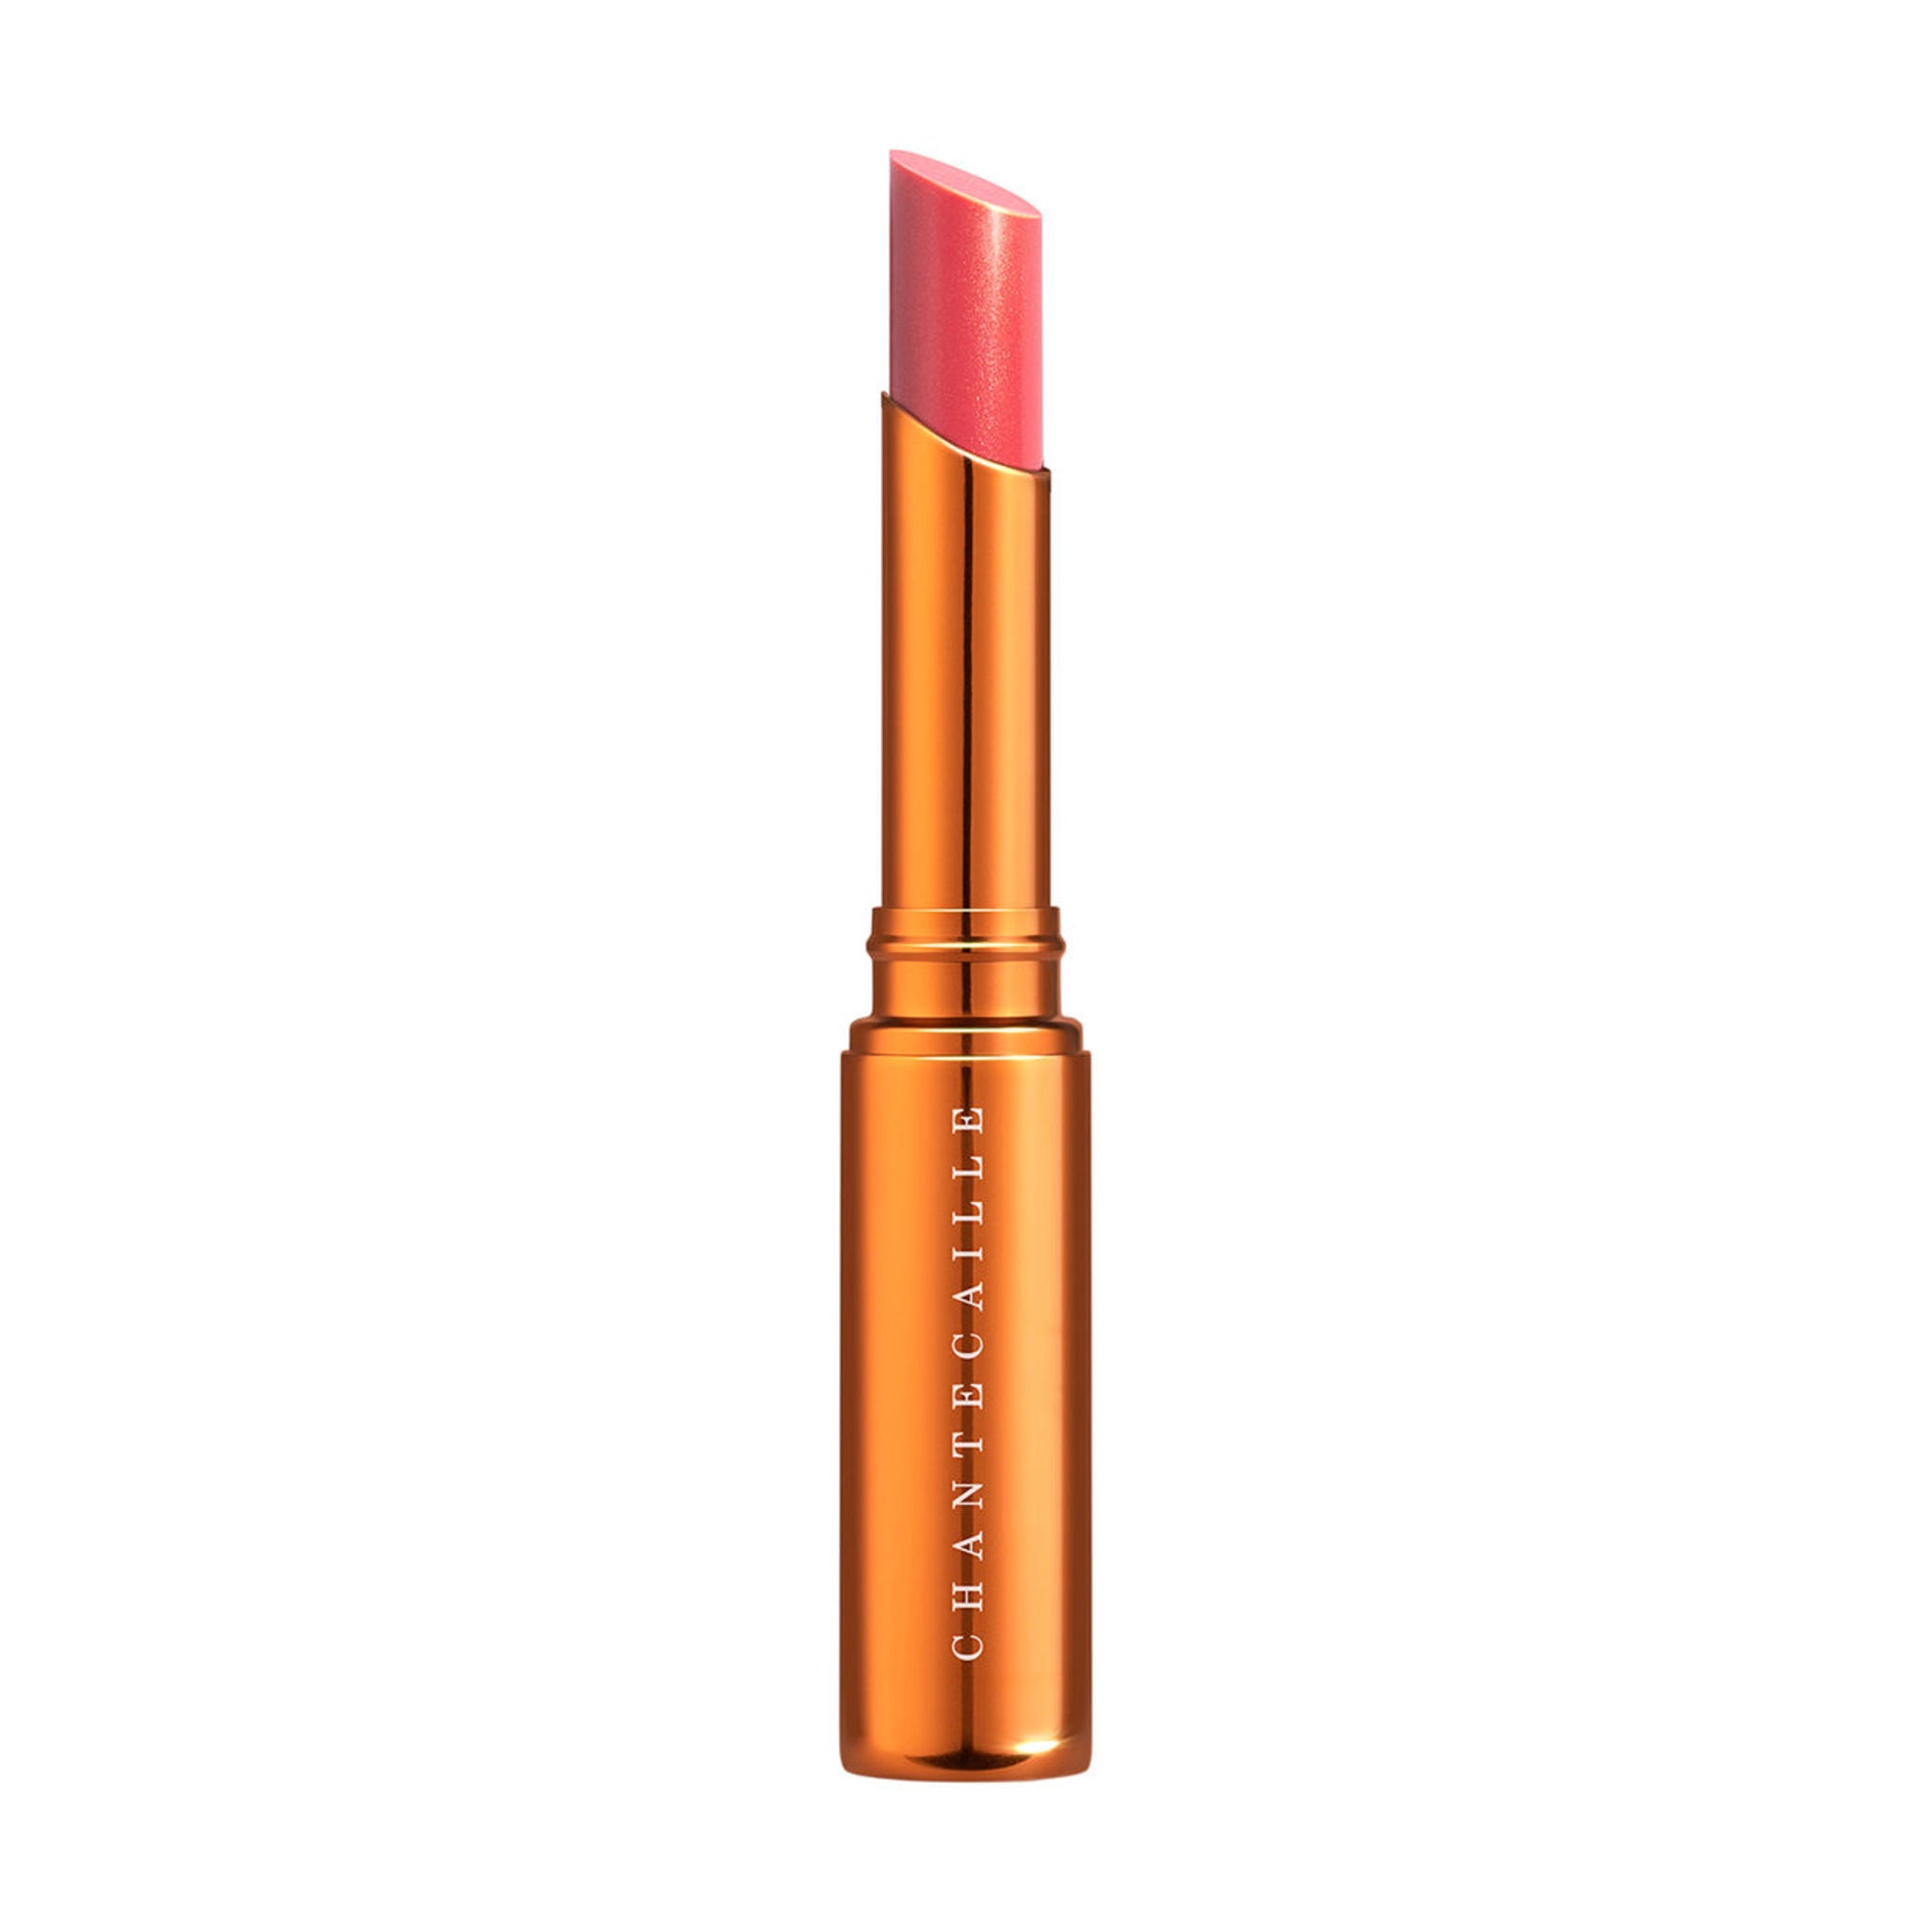 Chantecaille Sunstone Lip Sheer (Limited Edition) Color/Shade variant: Enthusiasm main image.